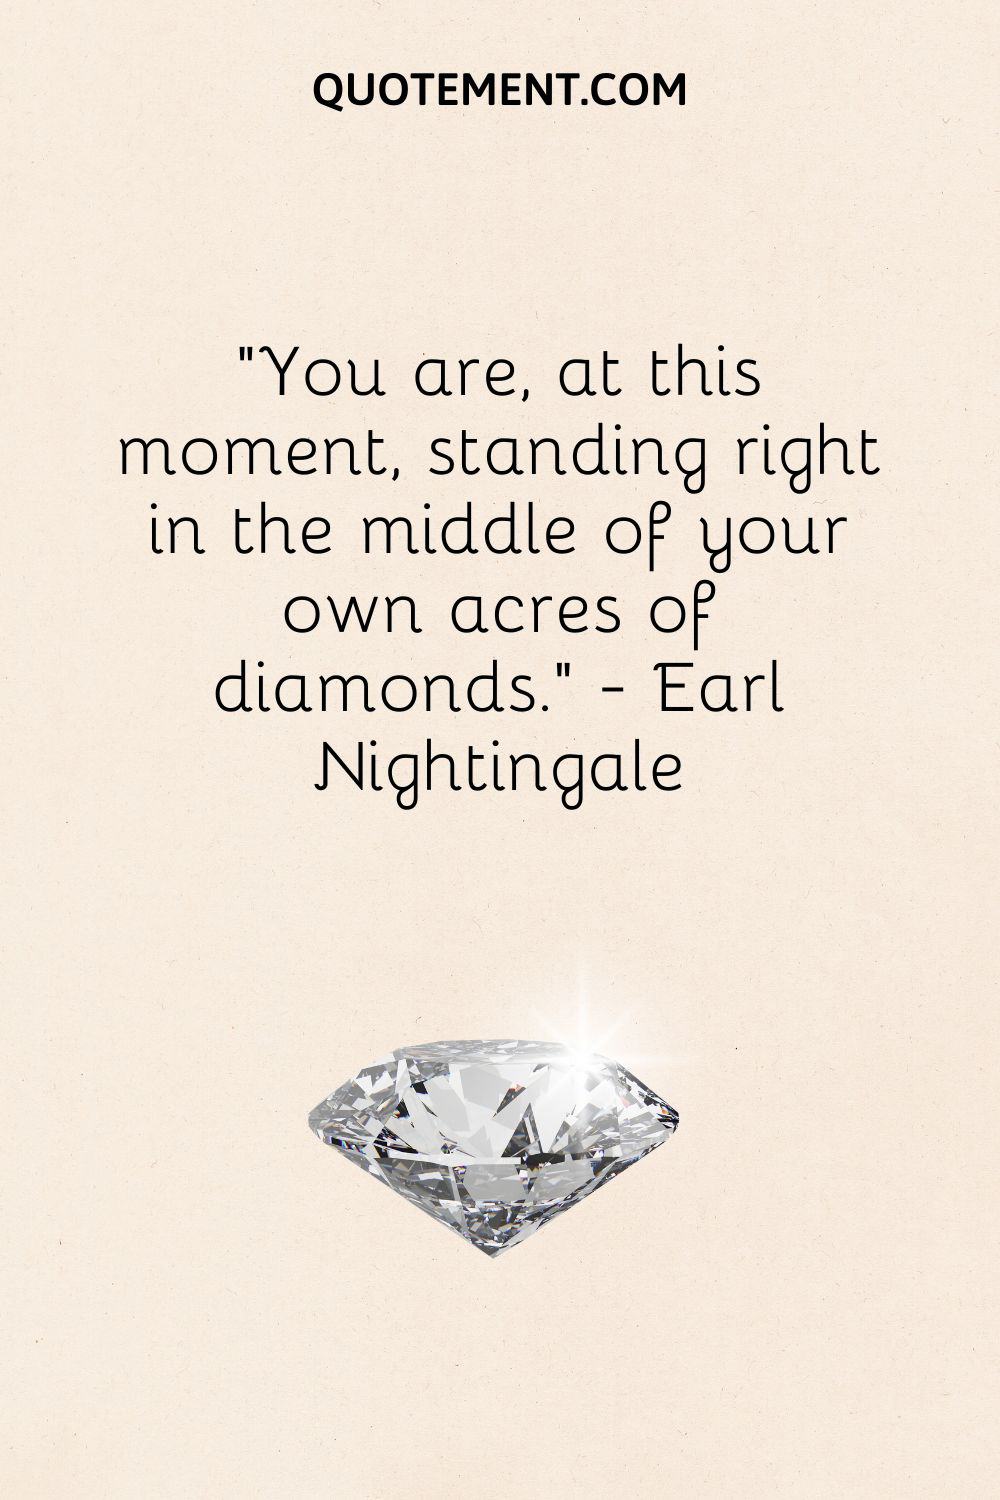 You are, at this moment, standing right in the middle of your own acres of diamonds